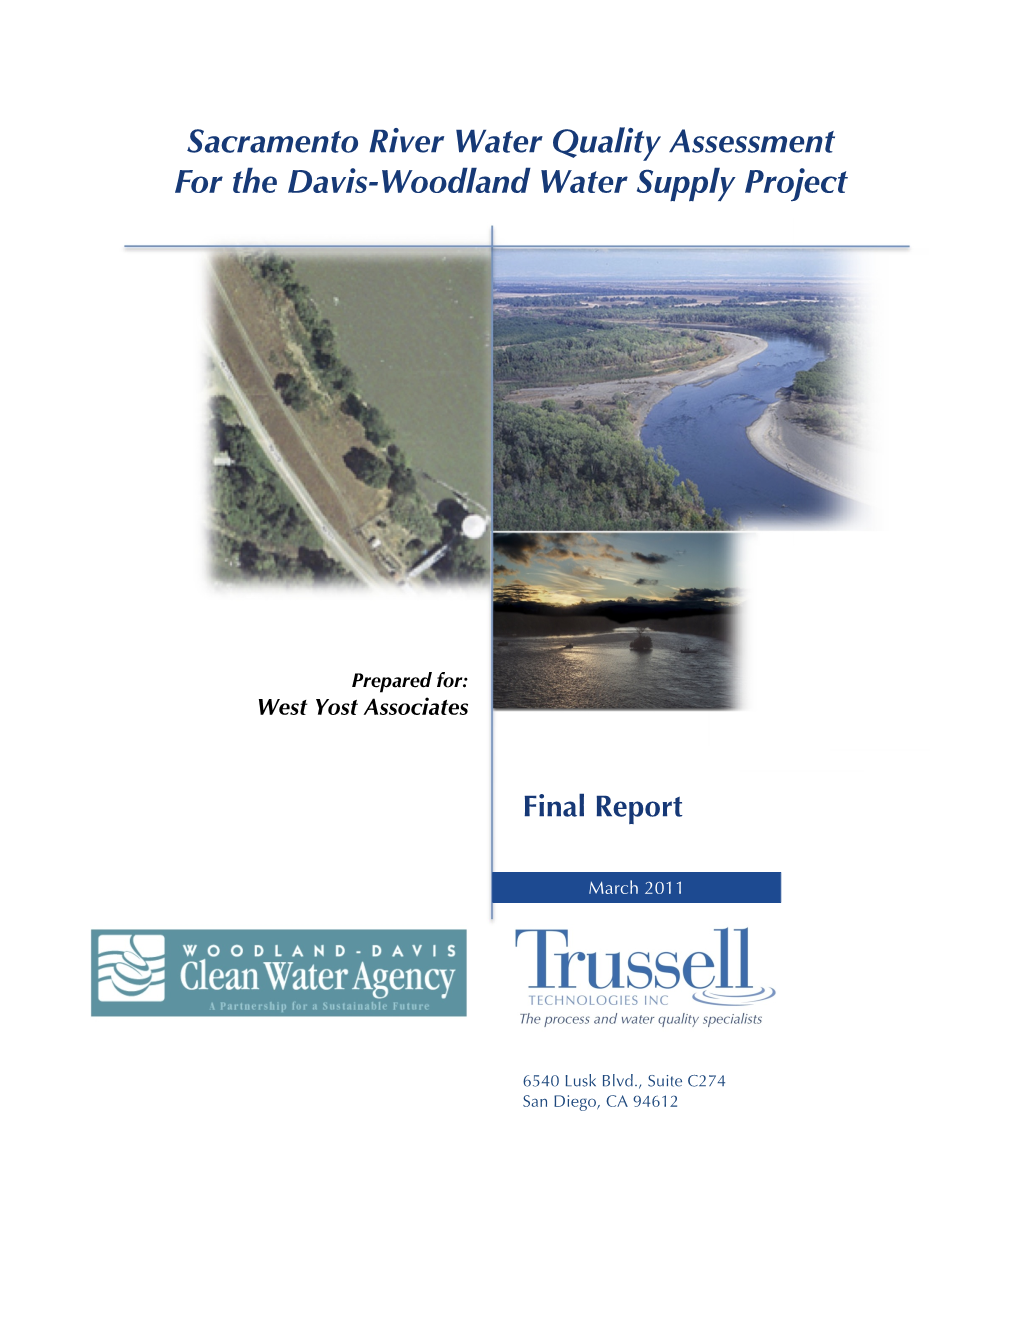 Sacramento River Water Quality Assessment for the Davis-Woodland Water Supply Project